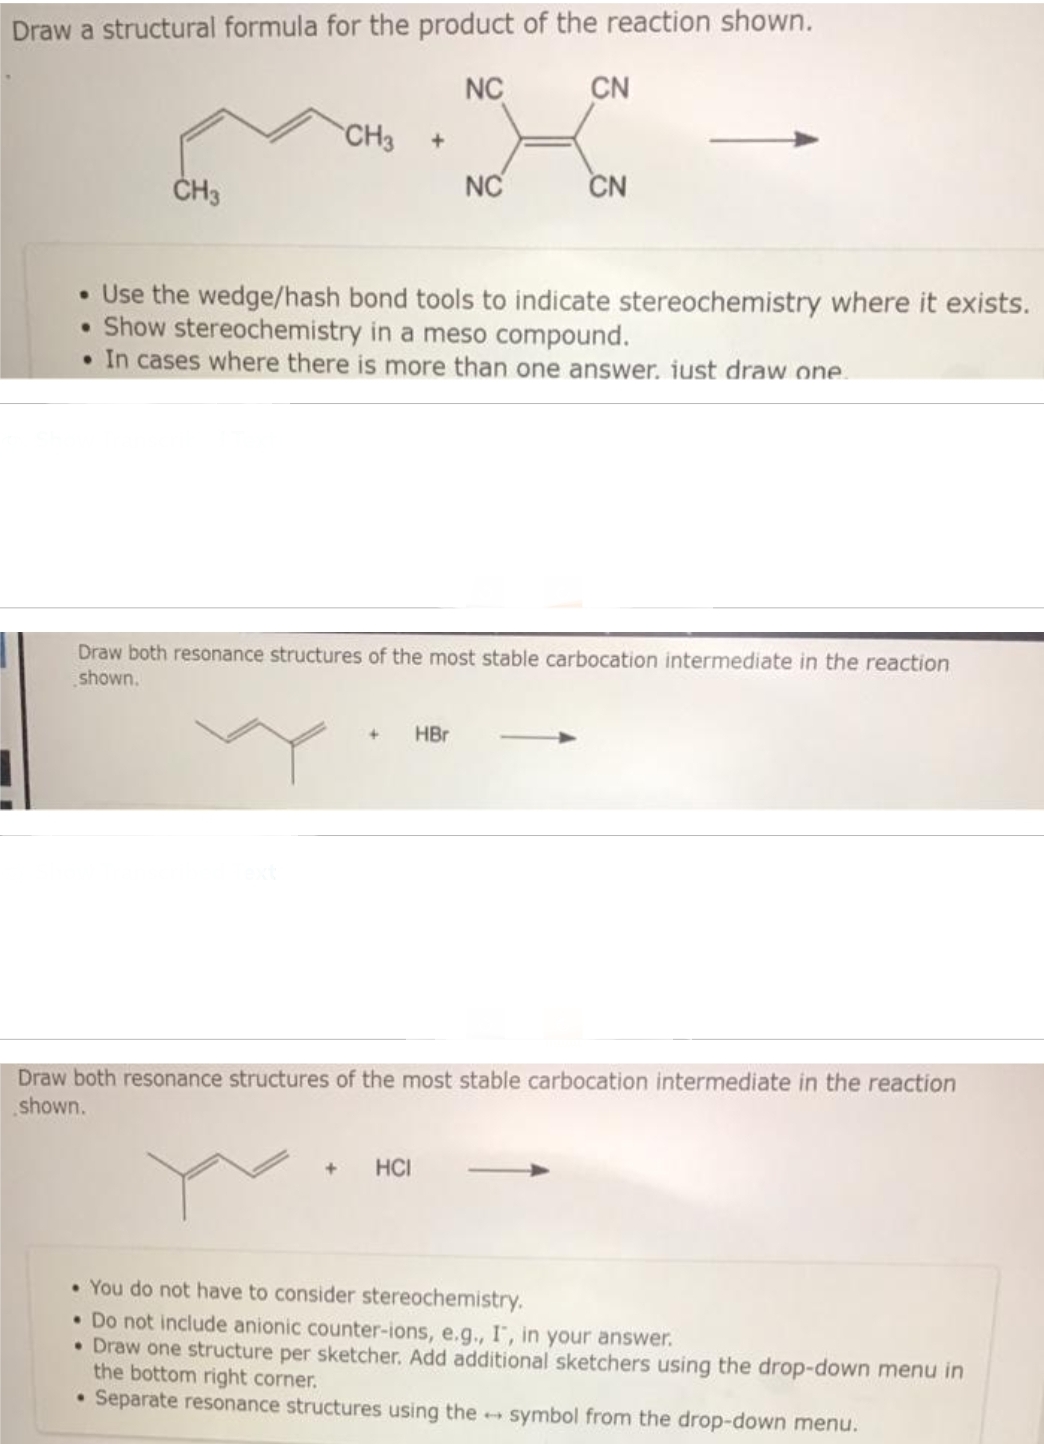 Draw a structural formula for the product of the reaction shown.
NC
CH3
CH3 +
NC
+ HBr
CN
• Use the wedge/hash bond tools to indicate stereochemistry where it exists.
• Show stereochemistry in a meso compound.
• In cases where there is more than one answer. just draw one
CN
Draw both resonance structures of the most stable carbocation intermediate in the reaction
shown.
+ HCI
Draw both resonance structures of the most stable carbocation intermediate in the reaction
shown.
• You do not have to consider stereochemistry.
• Do not include anionic counter-ions, e.g., I, in your answer.
• Draw one structure per sketcher. Add additional sketchers using the drop-down menu in
the bottom right corner.
• Separate resonance structures using the symbol from the drop-down menu.